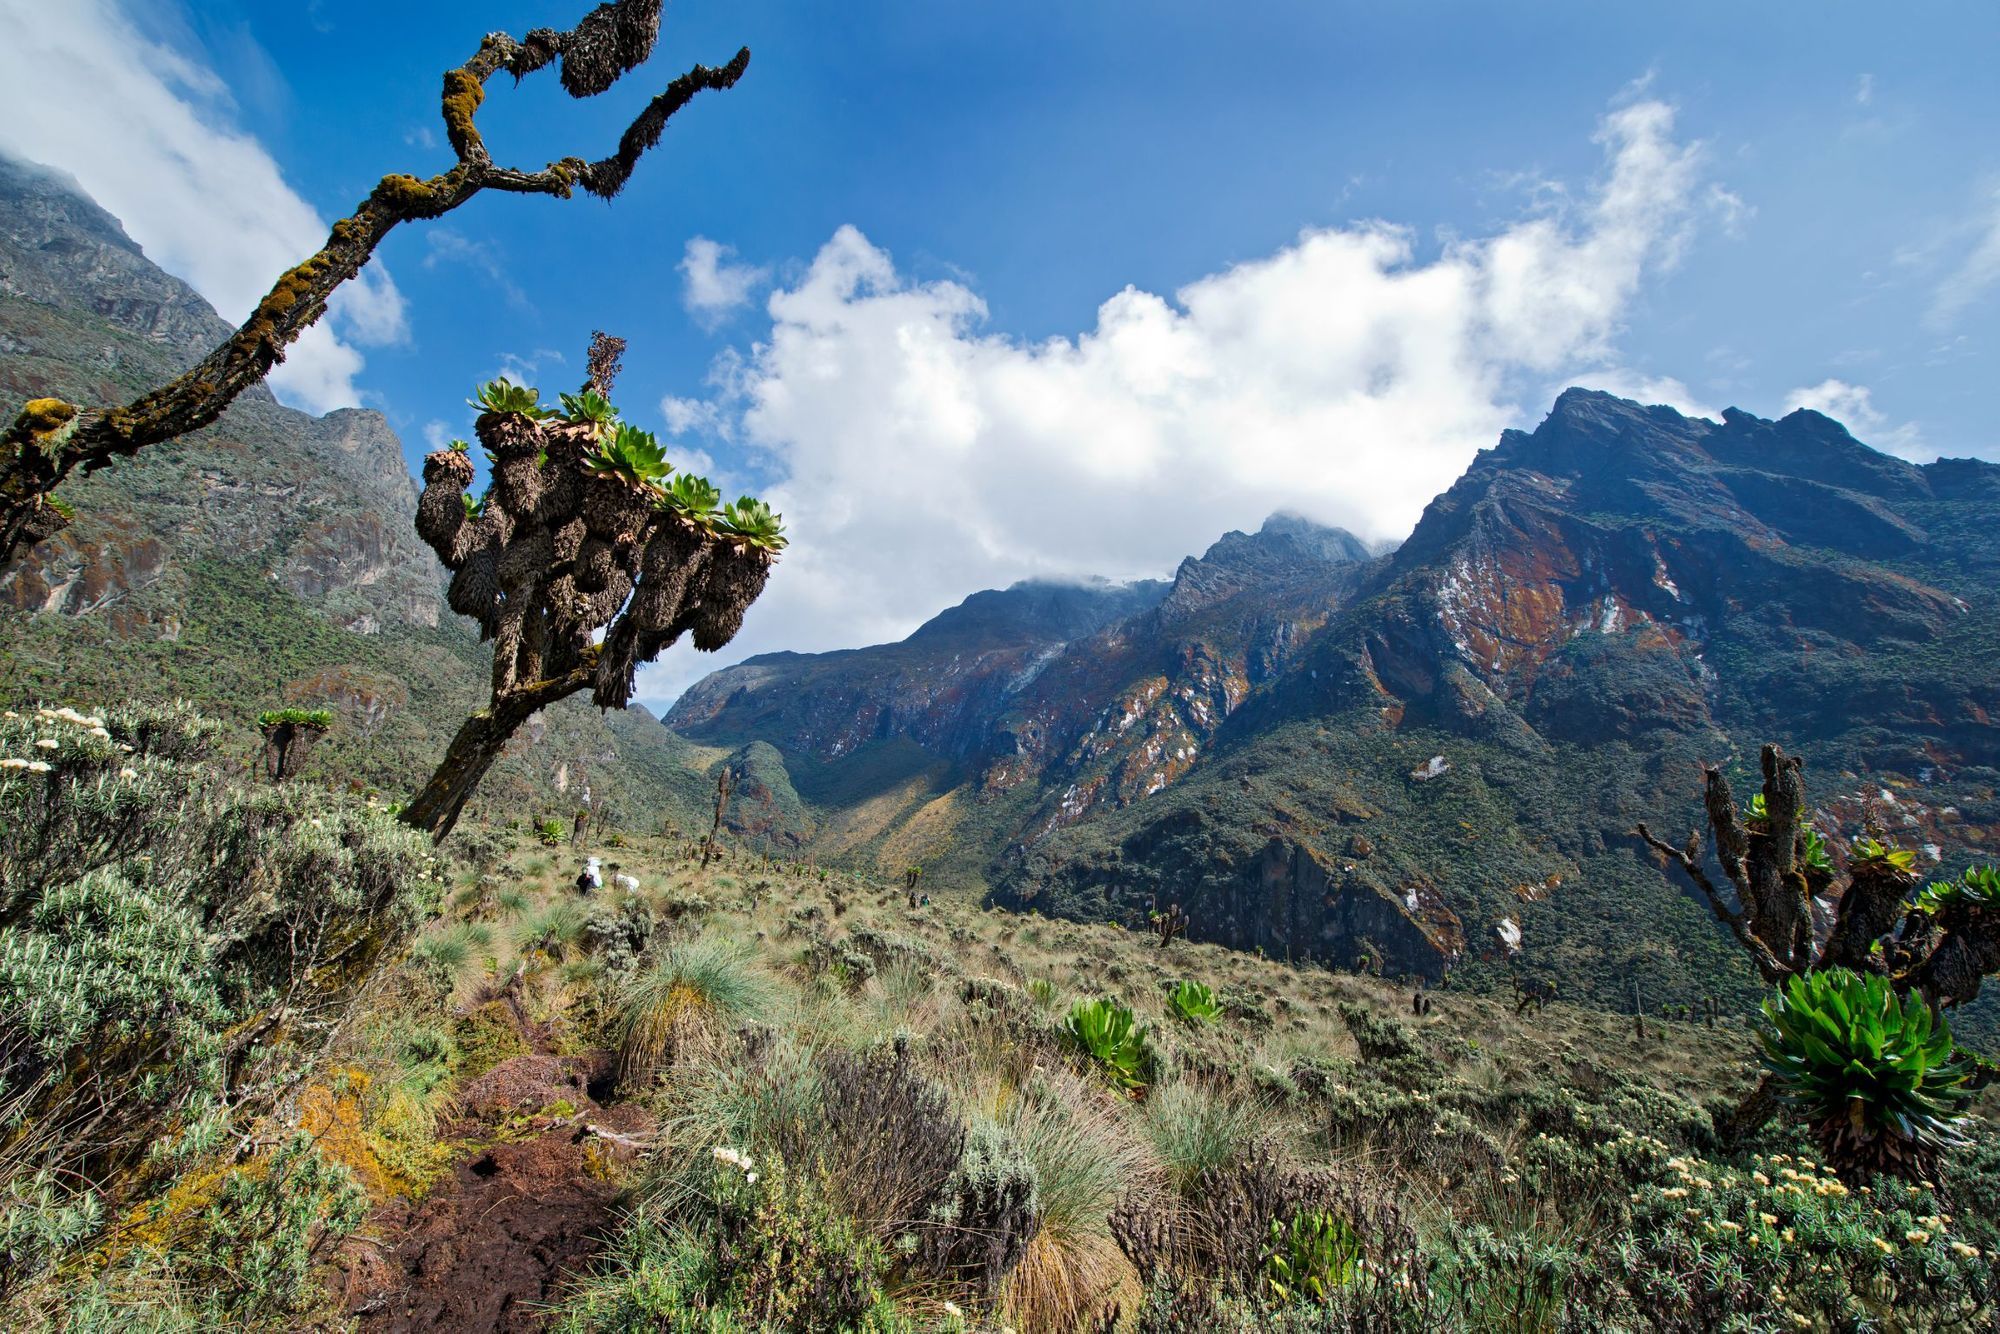 A view of the Rwenzori Mountains, including Mount Speke, in Uganda, with groundsel forest in the foreground.